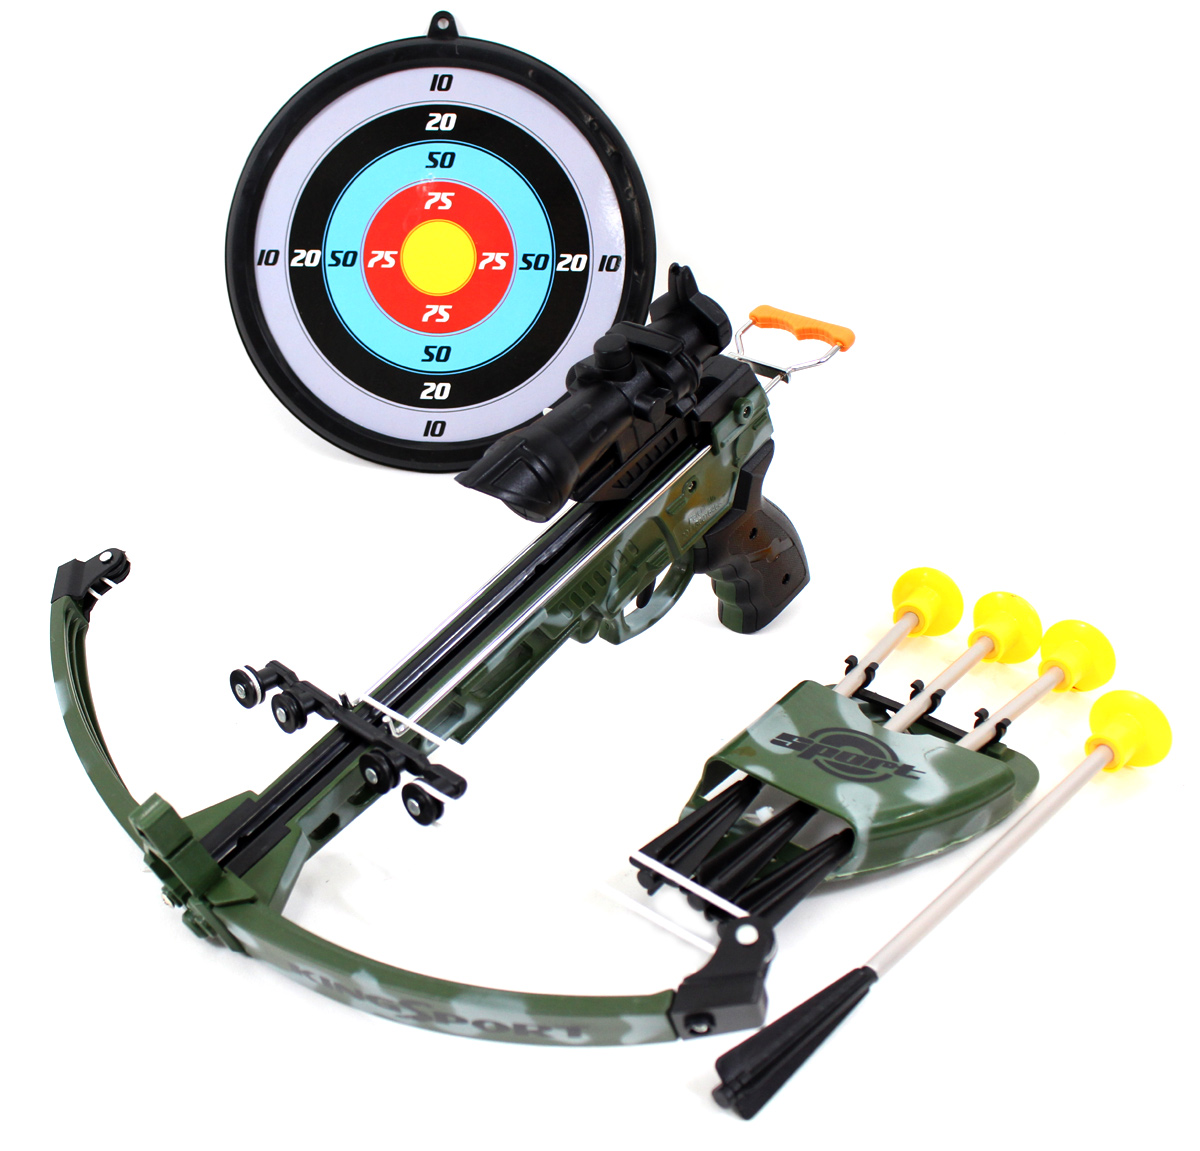 AZ Trading and Import Military Toy Crossbow Set With Scope And Target